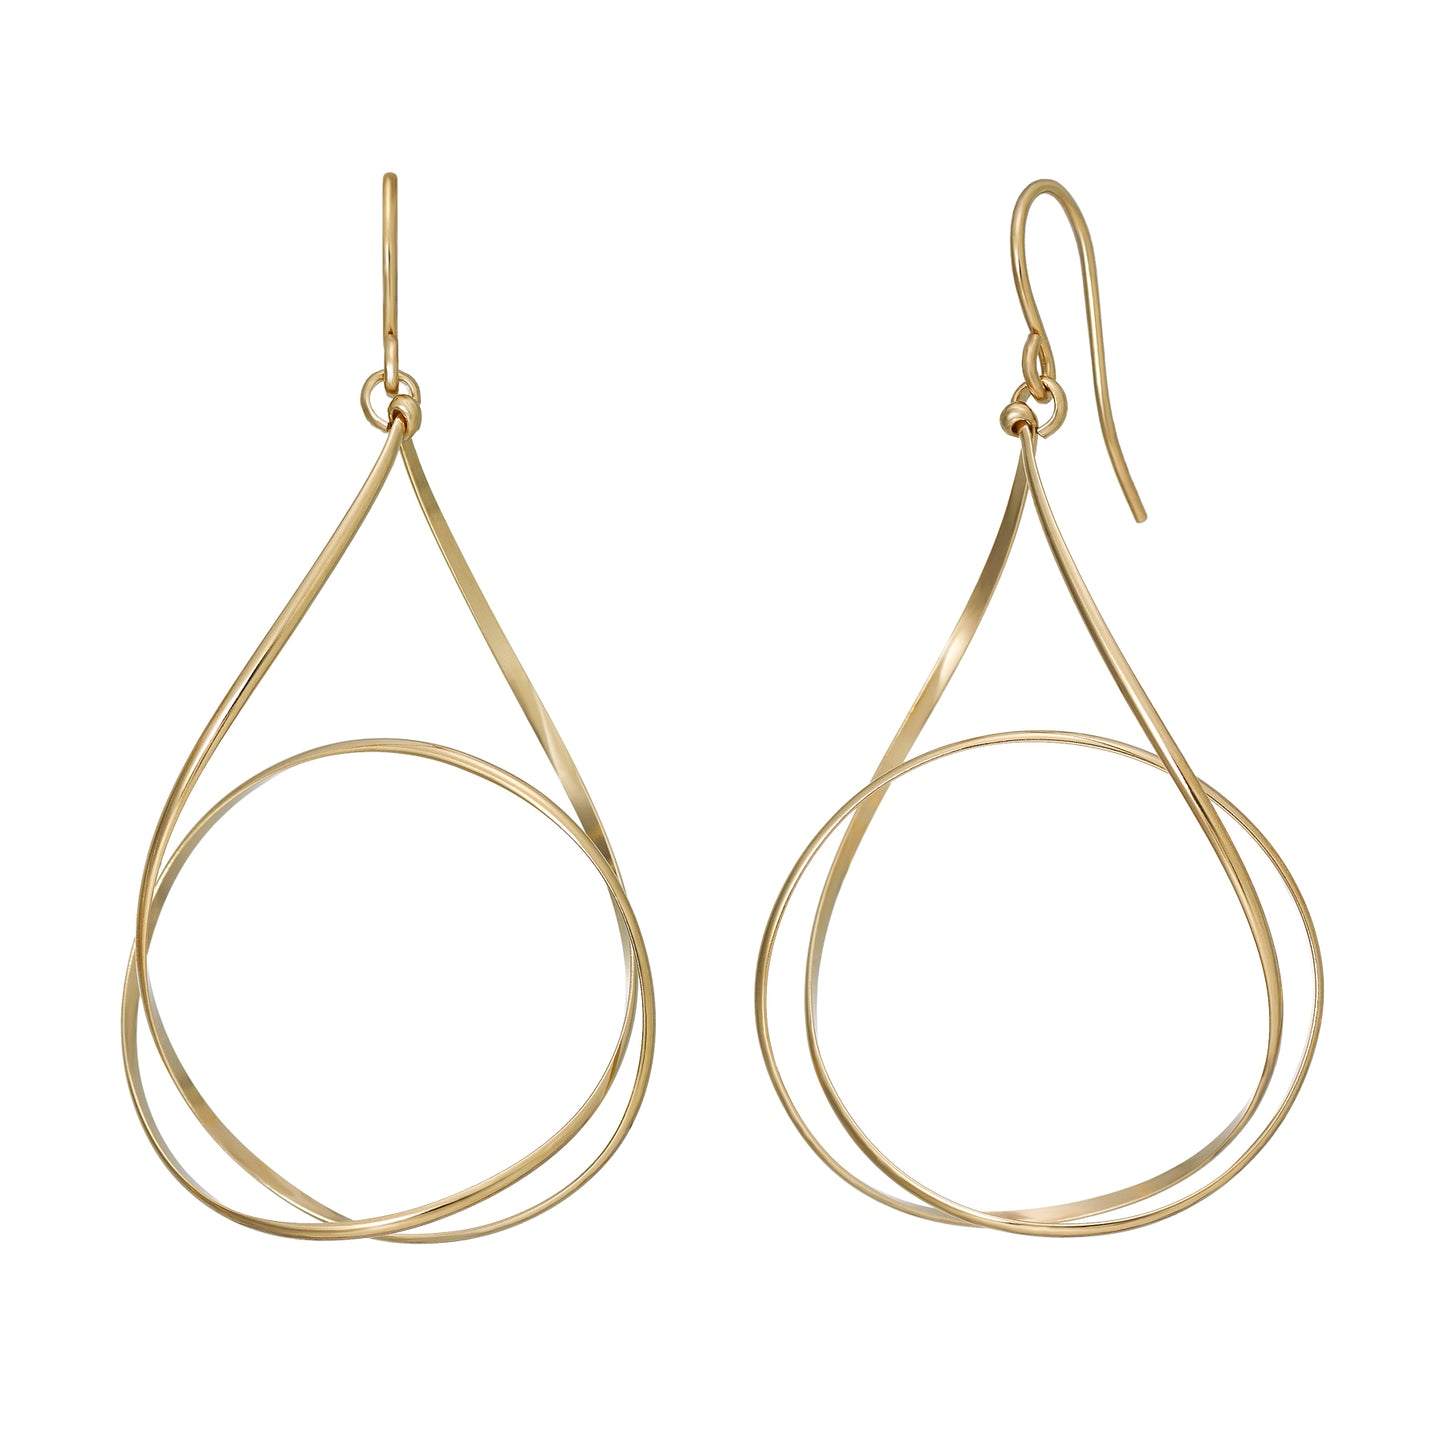 Gold Filled Drop Wire Earrings - Product Image